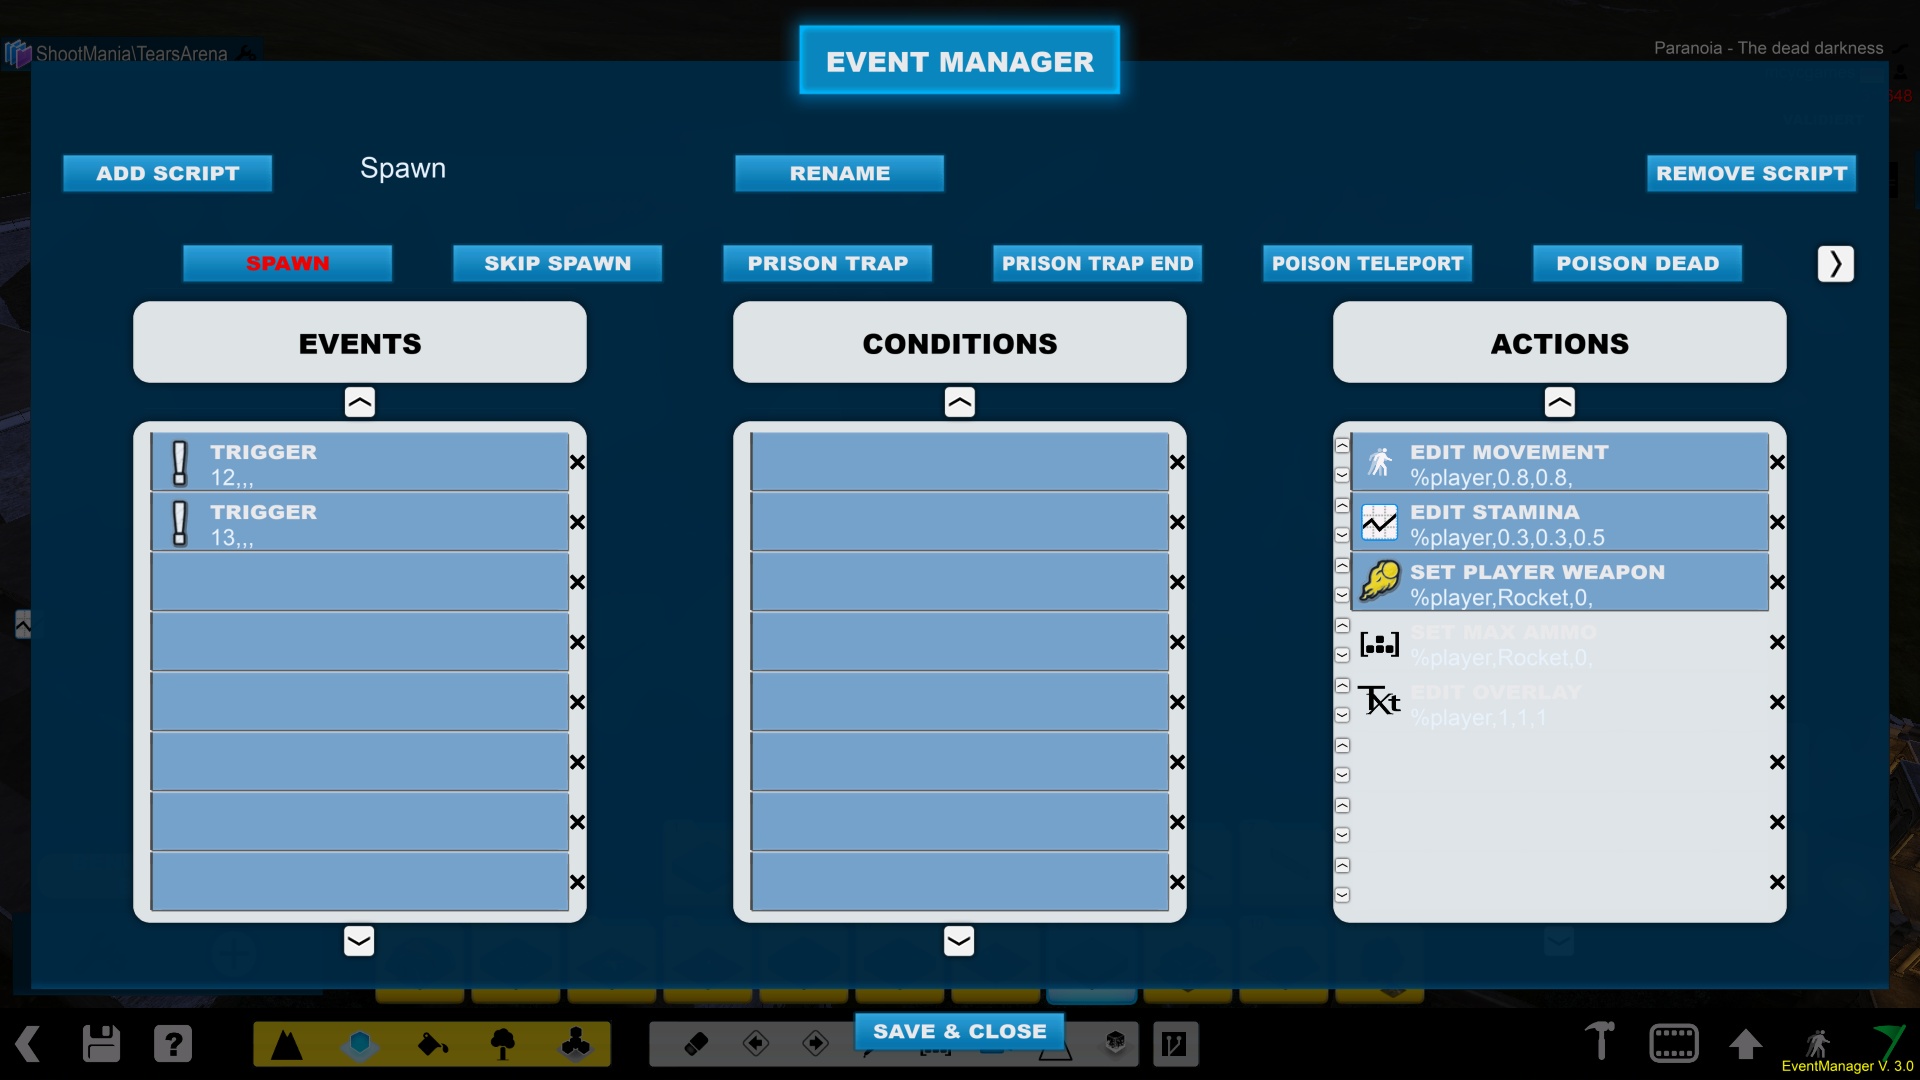 The primary editor interface.